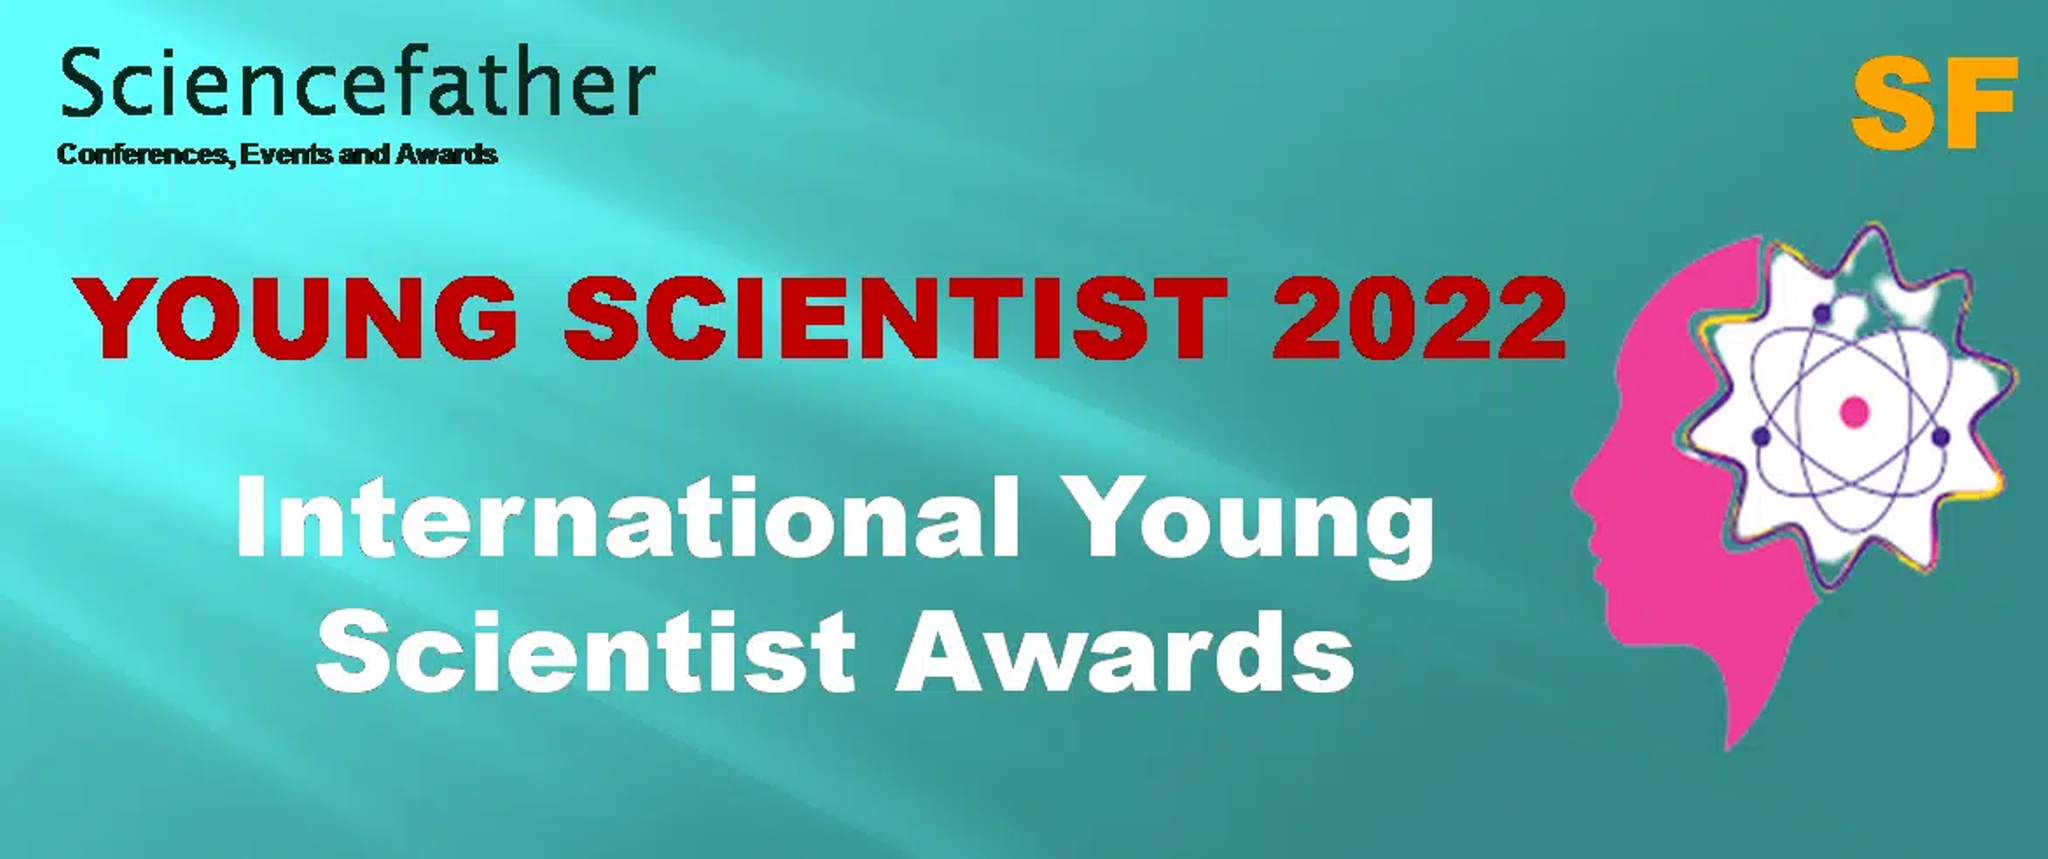 International Young Scientist Awards, Online Event